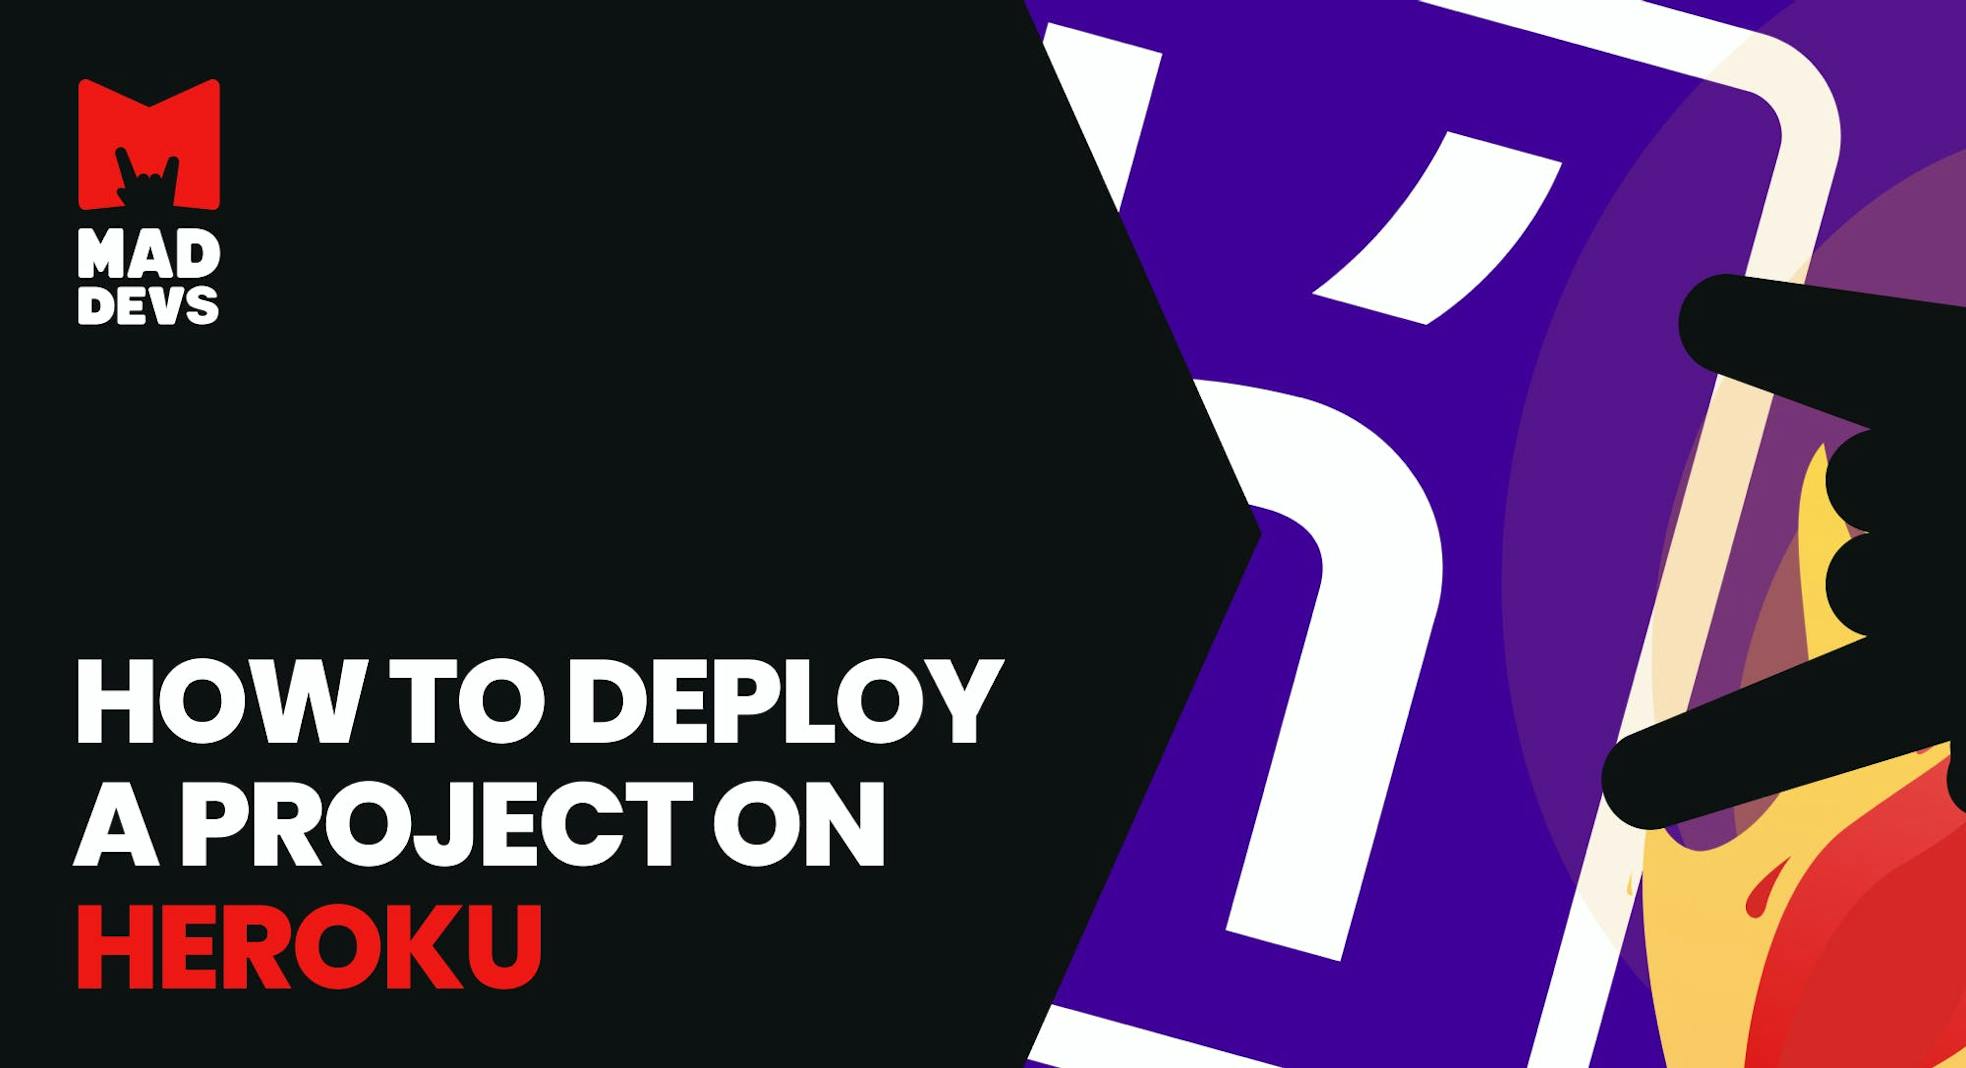 How to Deploy a Project on Heroku